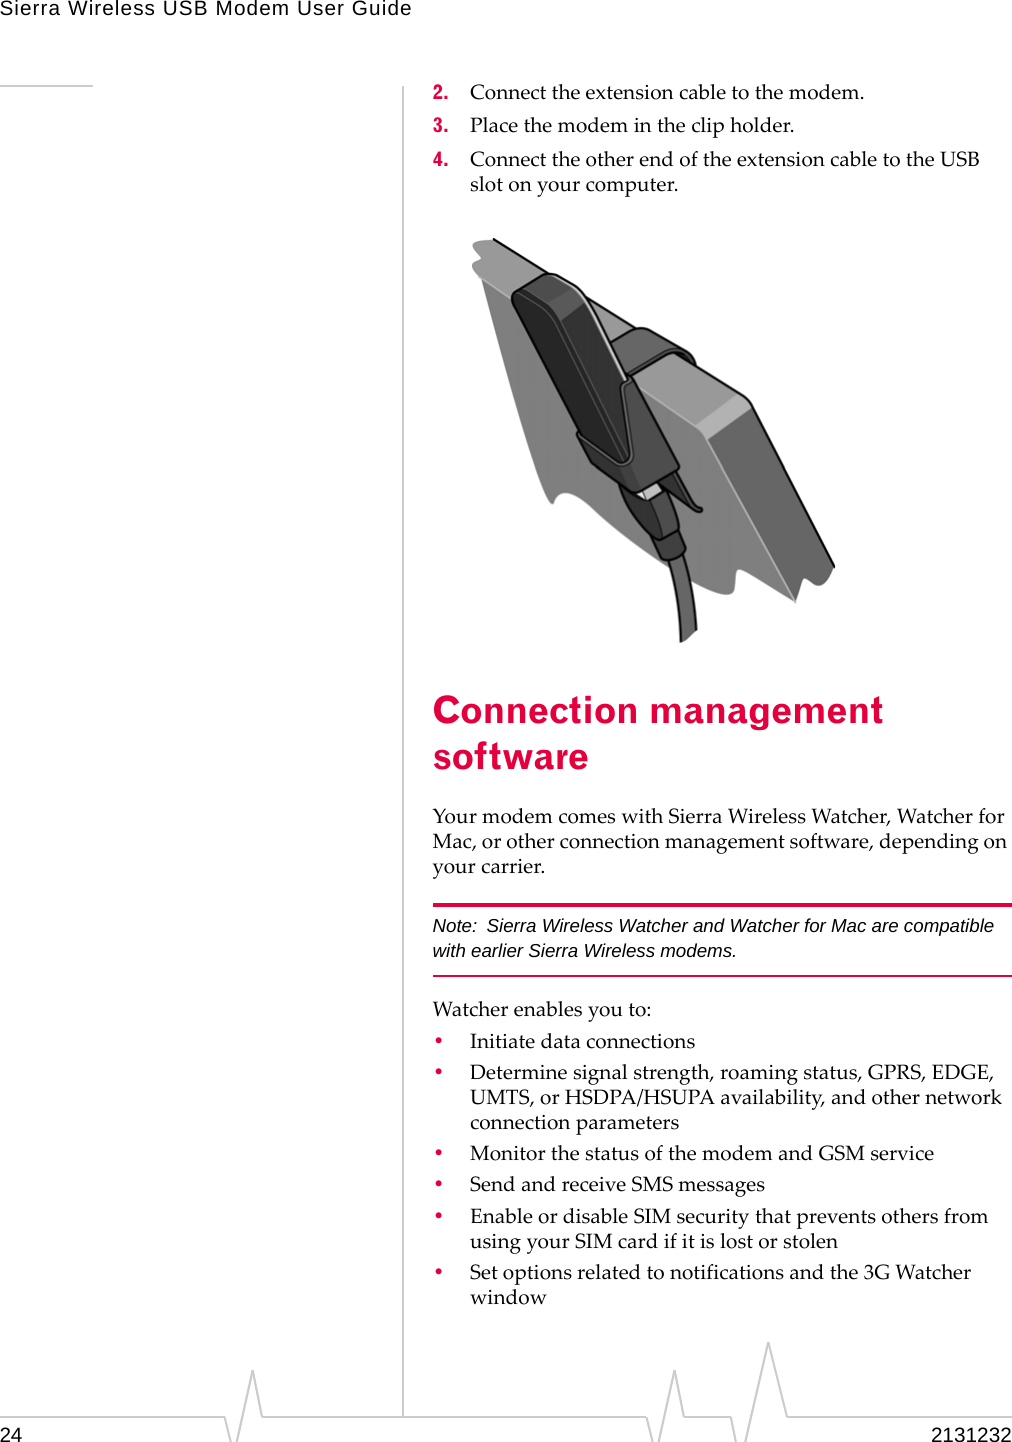 Sierra Wireless USB Modem User Guide24 21312322. Connecttheextensioncabletothemodem.3. Placethemodemintheclipholder.4. ConnecttheotherendoftheextensioncabletotheUSBslotonyourcomputer.Connection management softwareYourmodemcomeswithSierraWirelessWatcher,WatcherforMac,orotherconnectionmanagementsoftware,dependingonyourcarrier.Note: Sierra Wireless Watcher and Watcher for Mac are compatible with earlier Sierra Wireless modems.Watcherenablesyouto:•Initiatedataconnections•Determinesignalstrength,roamingstatus,GPRS,EDGE,UMTS,orHSDPA/HSUPAavailability,andothernetworkconnectionparameters•MonitorthestatusofthemodemandGSMservice•SendandreceiveSMSmessages•EnableordisableSIMsecuritythatpreventsothersfromusingyourSIMcardifitislostorstolen•Setoptionsrelatedtonotificationsandthe3GWatcherwindow